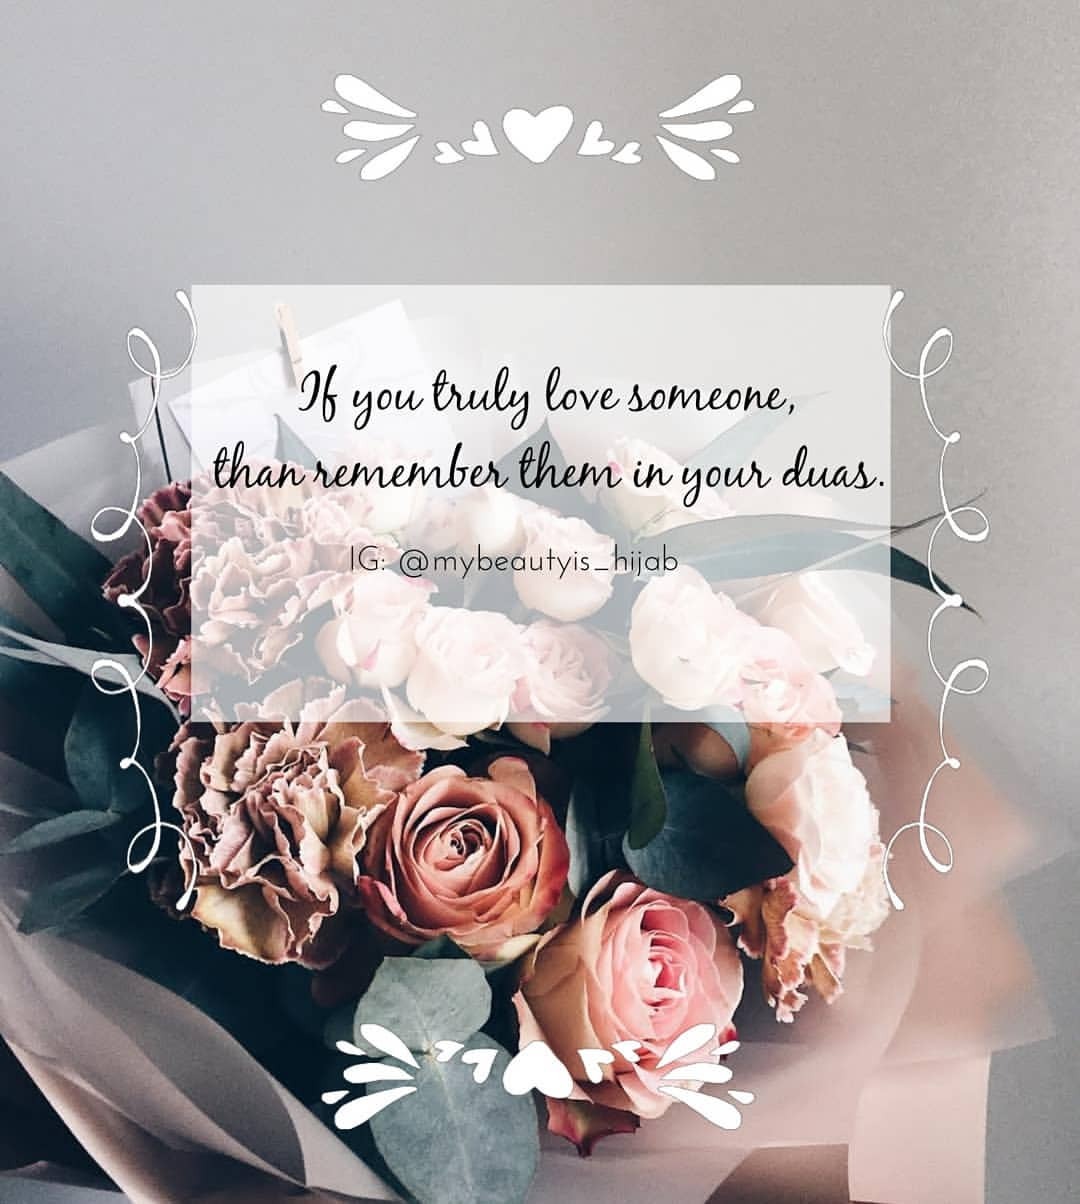 Welp My Beauty Is Hijab — ❤ . #islam #quotes #love #flowers... RS-27